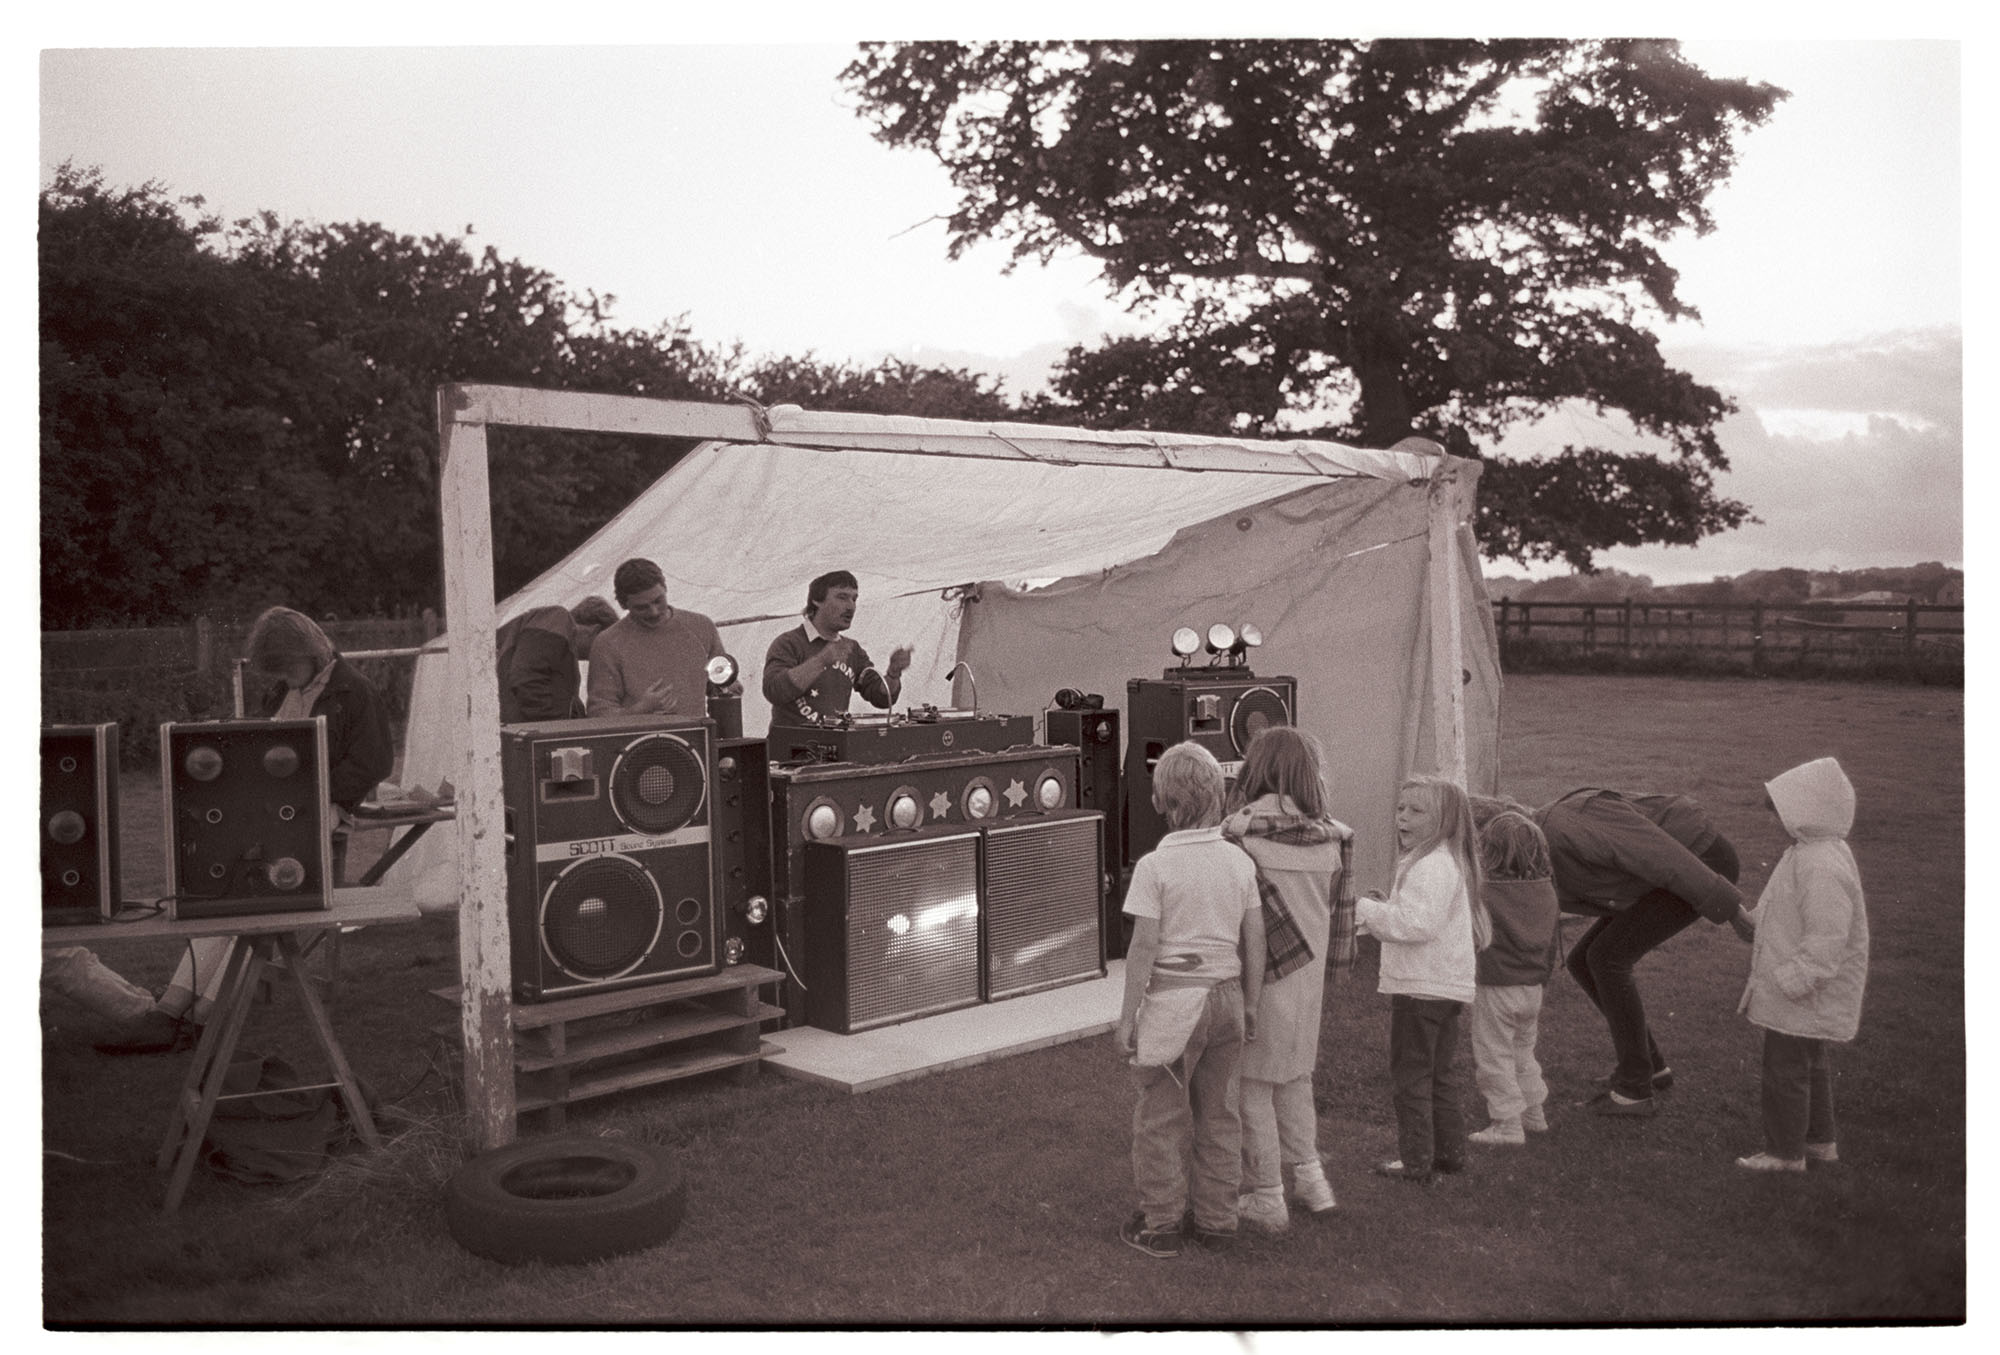 Mobile disco on the sports field by James Ravilious